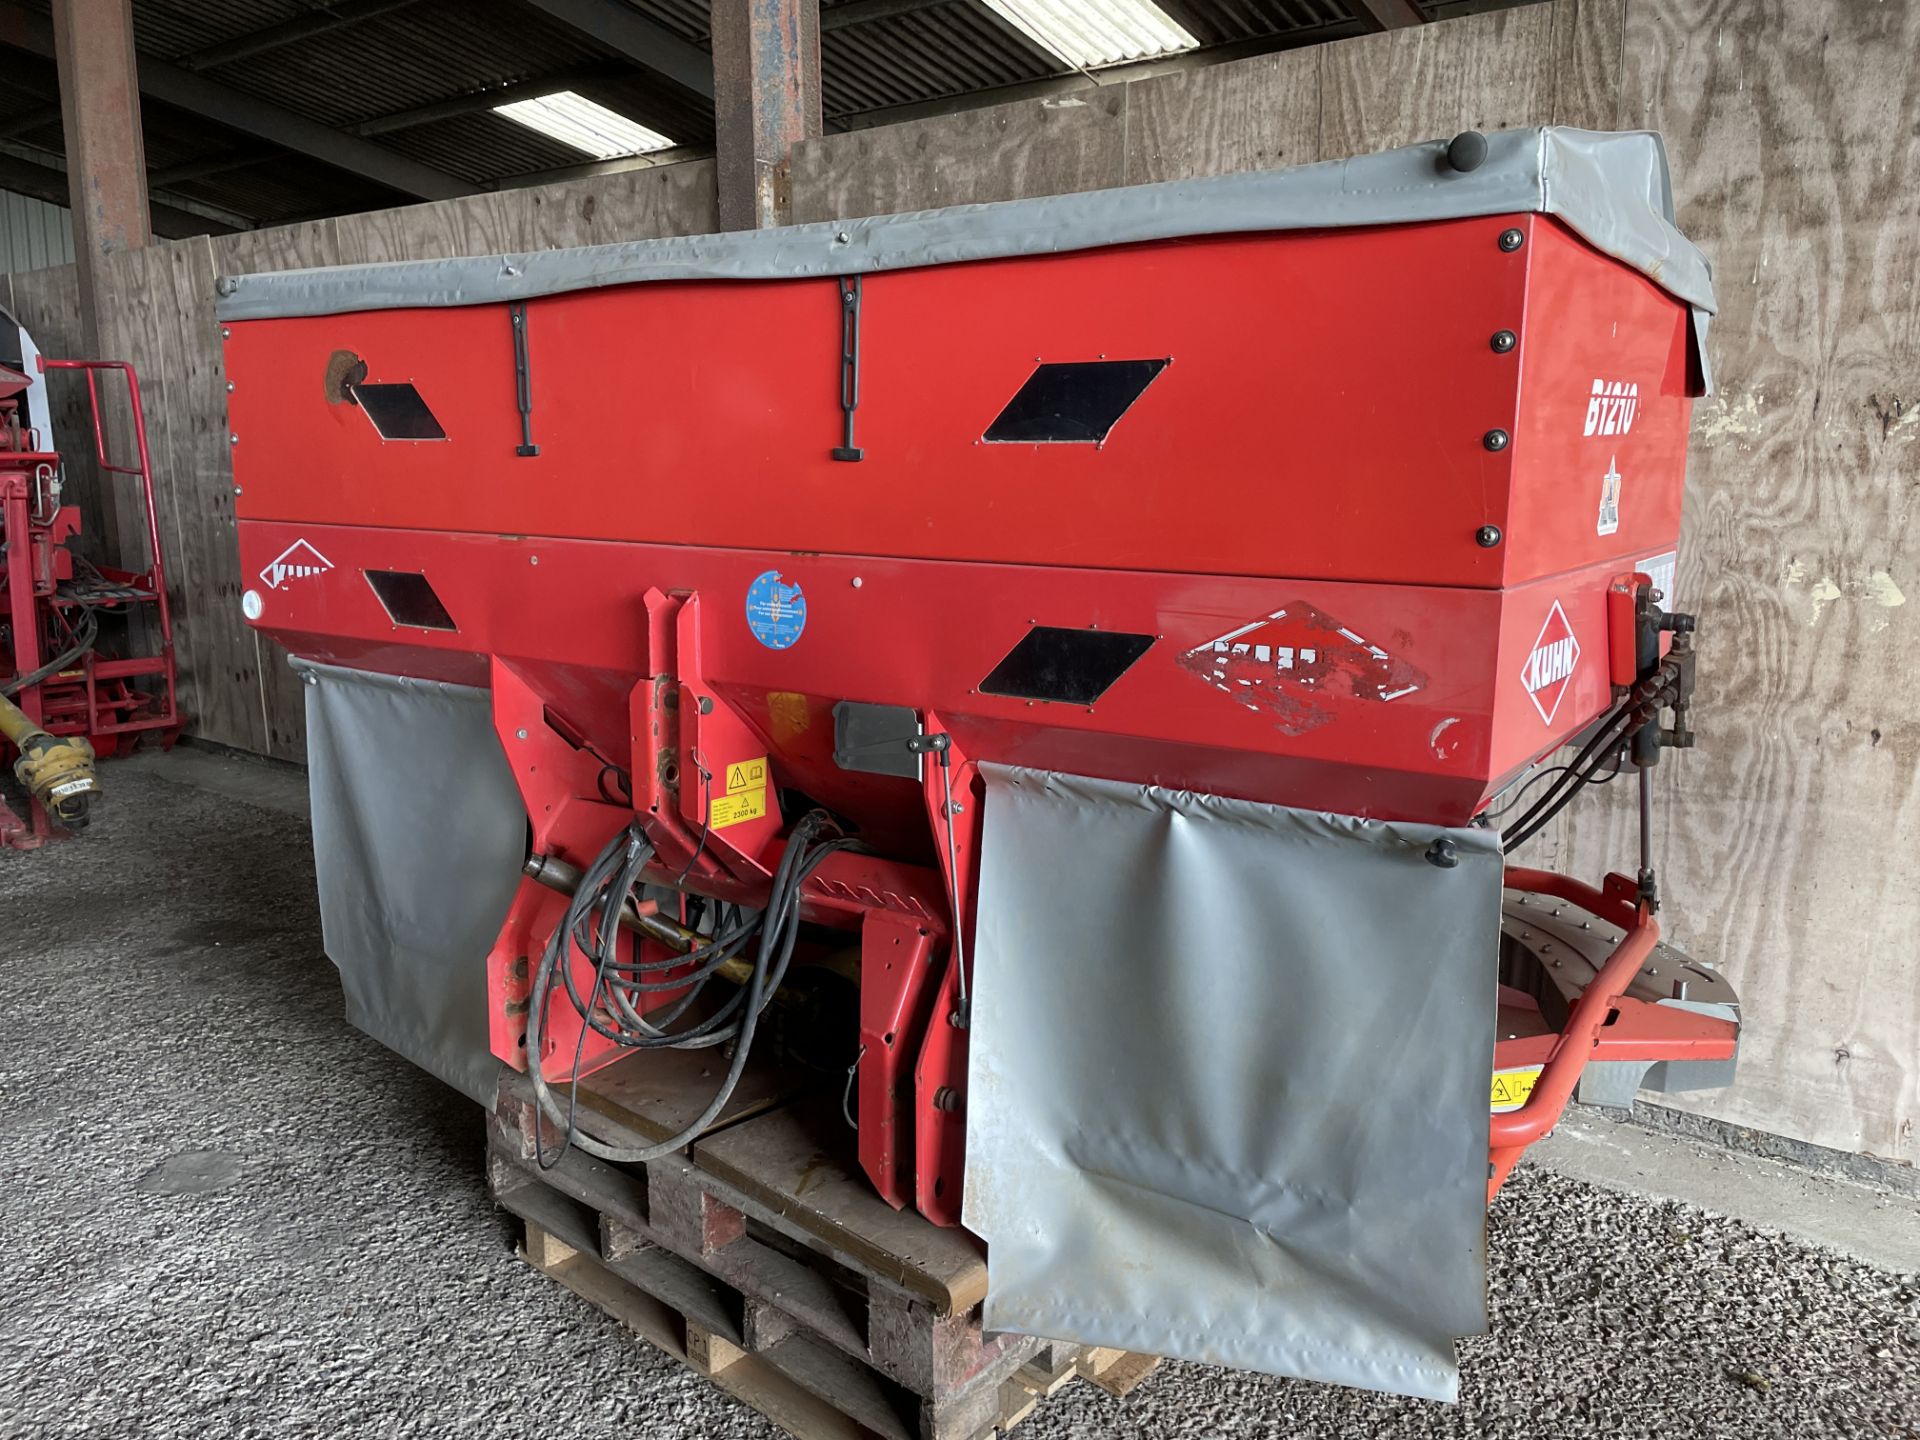 2005 Kuhn Fertiliser Spreader with B1210 extending sides - owned from new - Subject to VAT - Image 5 of 5